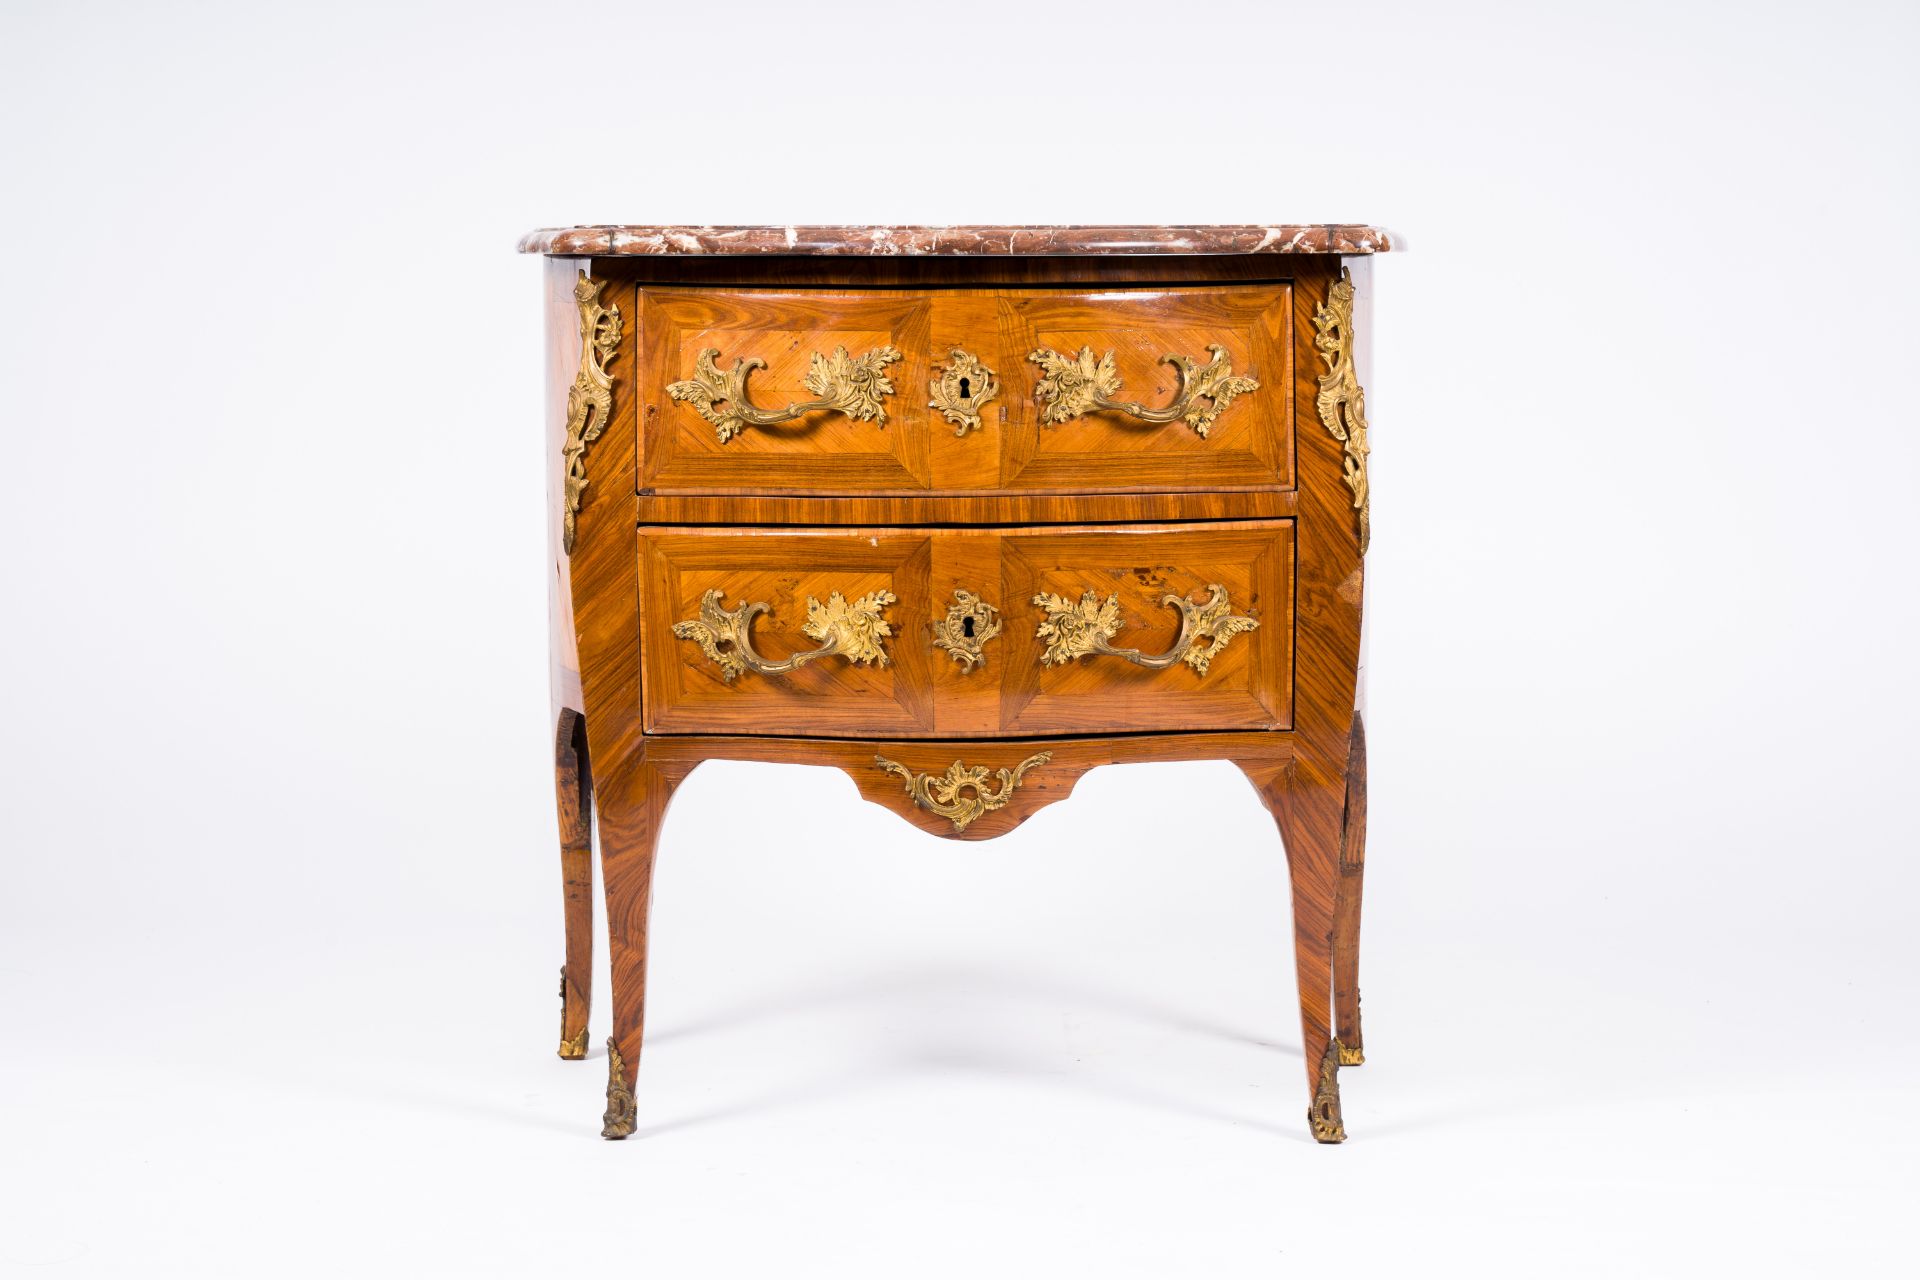 A French Louis XV style bronze mounted veneered wood chest of drawers with marble top, 18th C. - Image 2 of 6